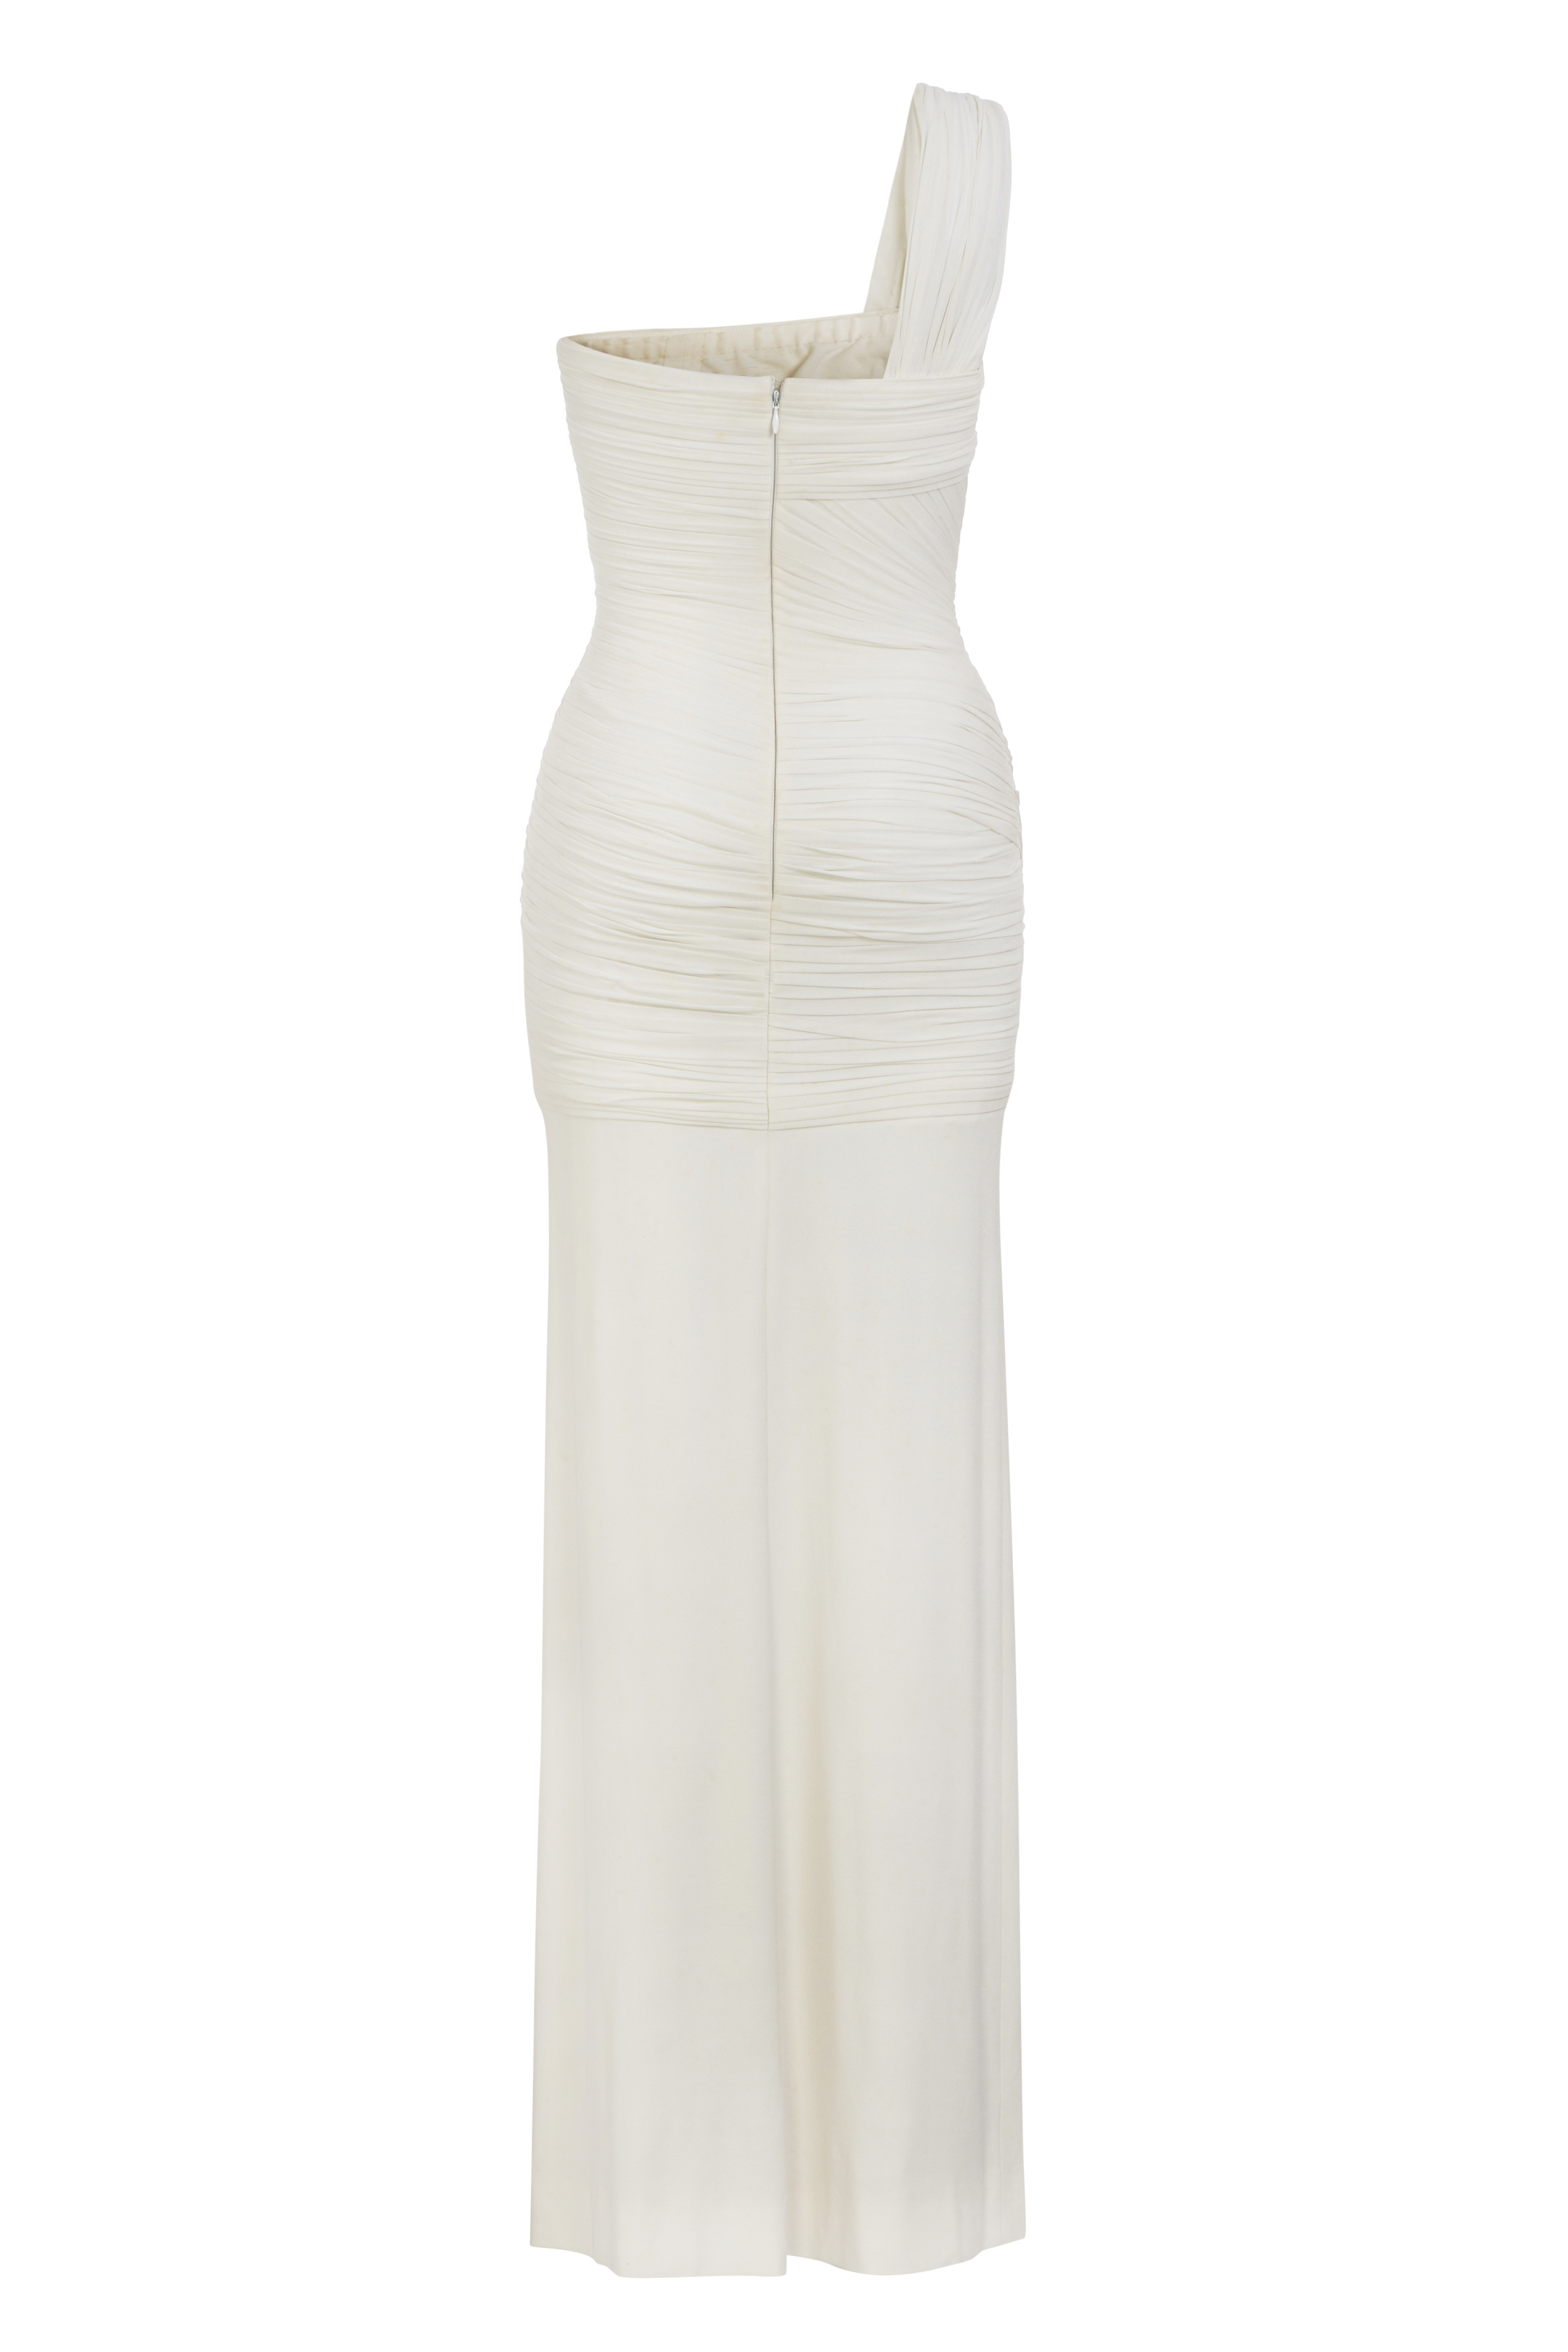 Herve Leroux Couture long white dress | Curate8